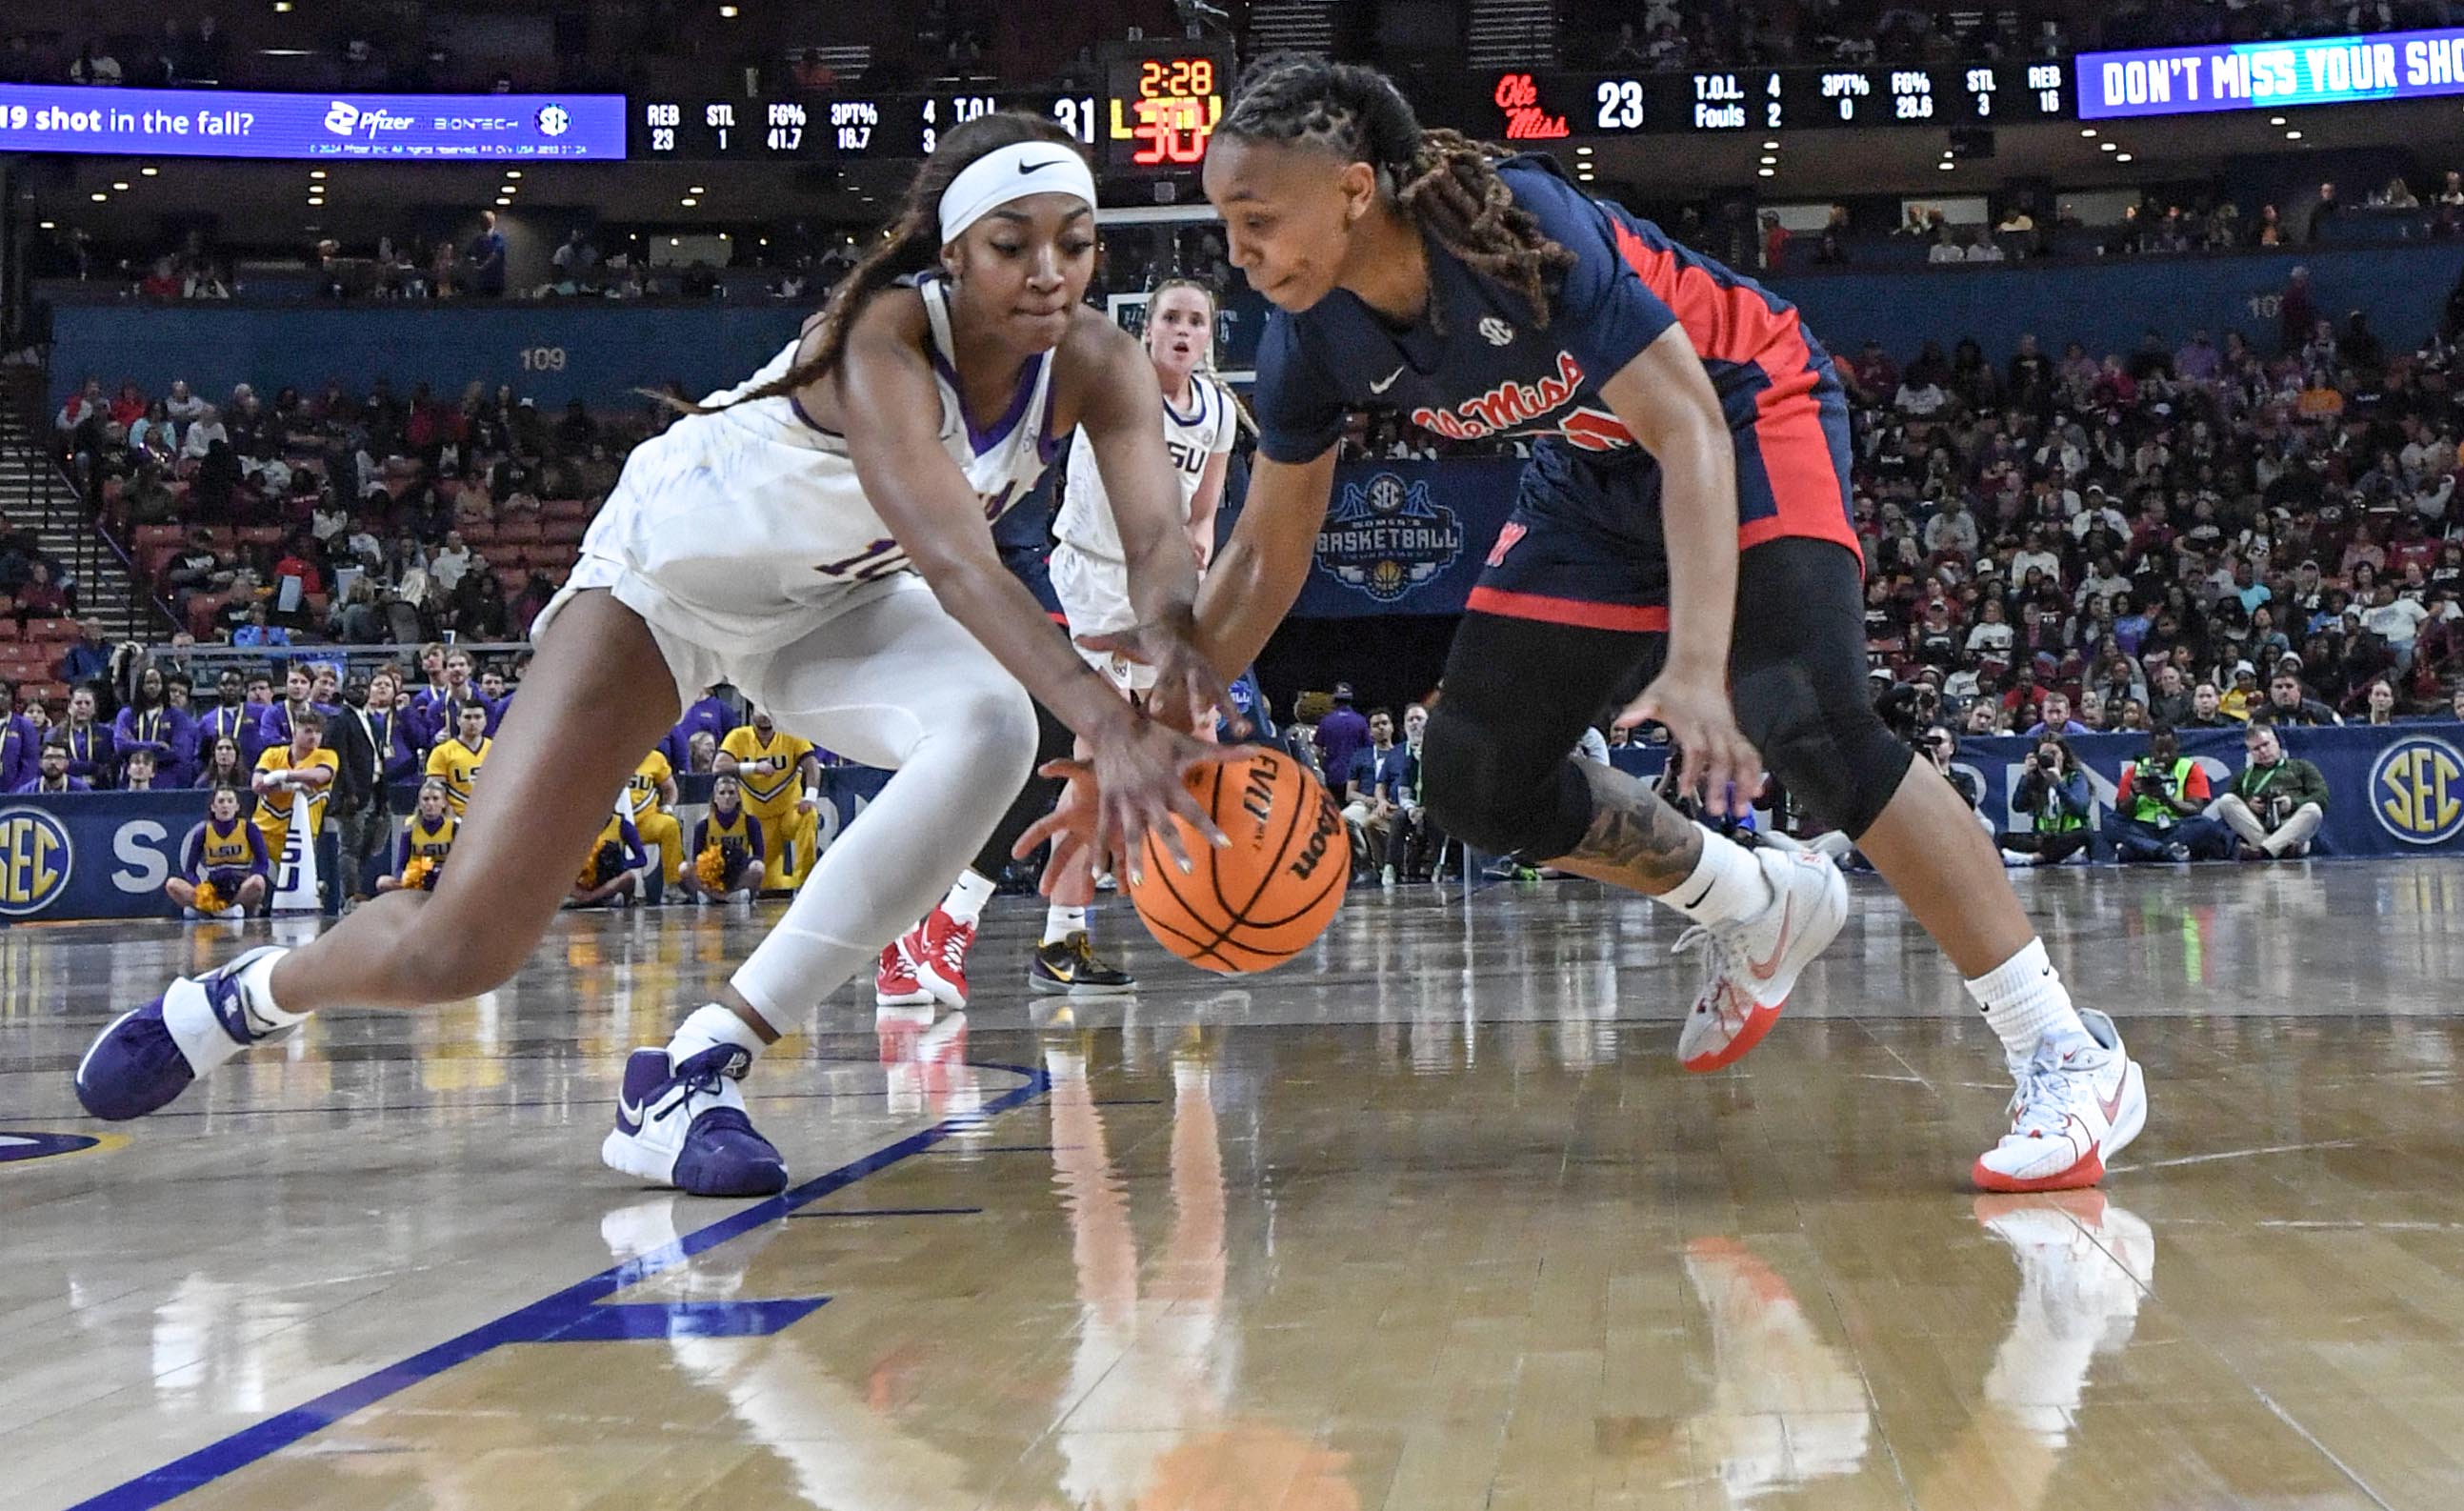 Louisiana State University forward Angel Reese (10) grabs a loose ball near Ole Miss guard Zakiya Stephenson (21) during the second quarter of the SEC Women's Basketball Tournament game at the Bon Secours Wellness Arena in Greenville, S.C. Saturday, March 9, 2024.